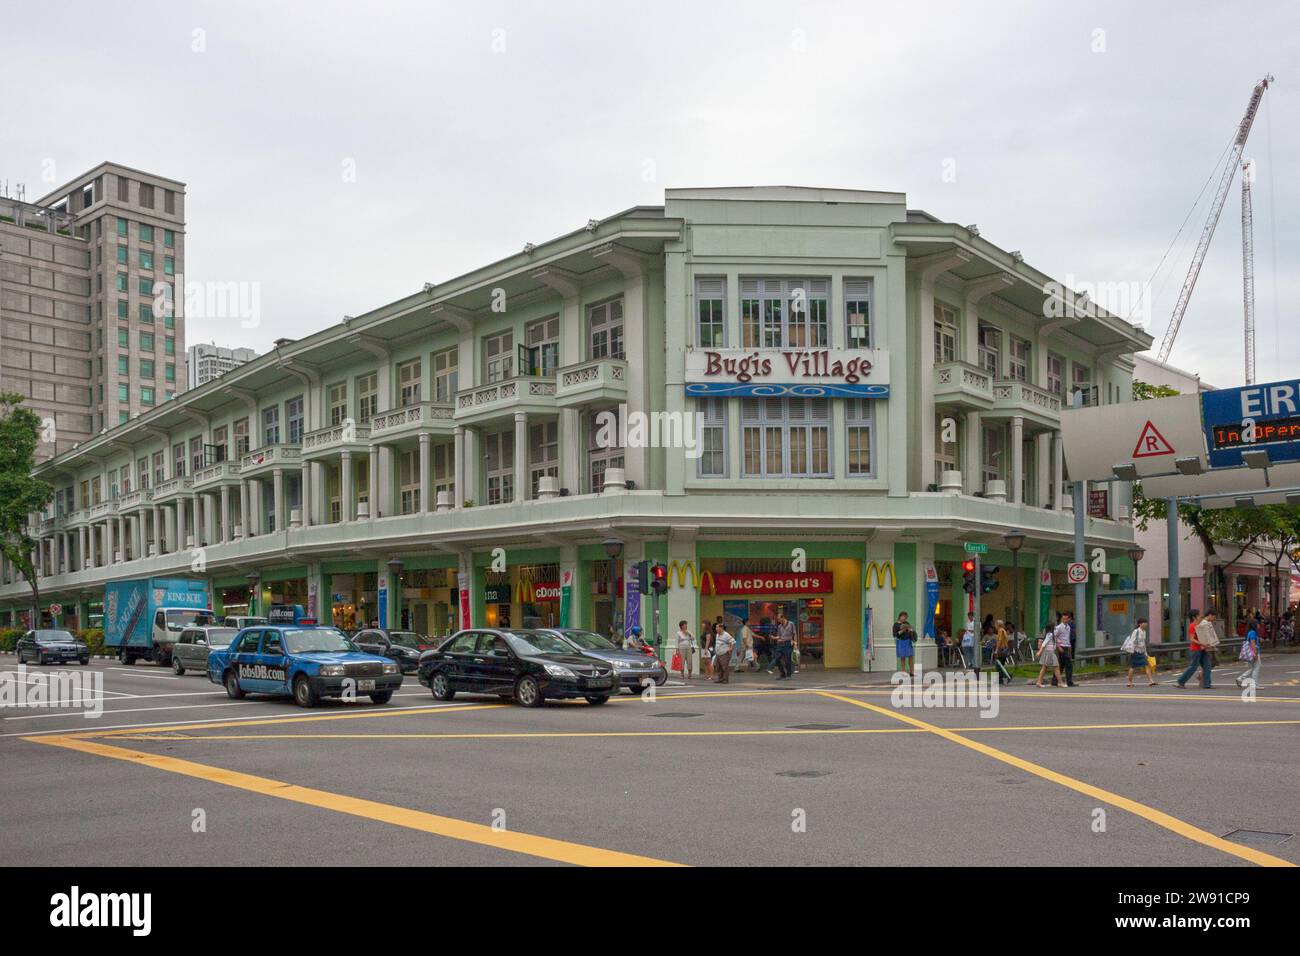 Singapore, Singapore - August 22 2007: Bugis Village at the junction of Victoria Street and Rochor Road. It is a two storey conservation shop houses c Stock Photo